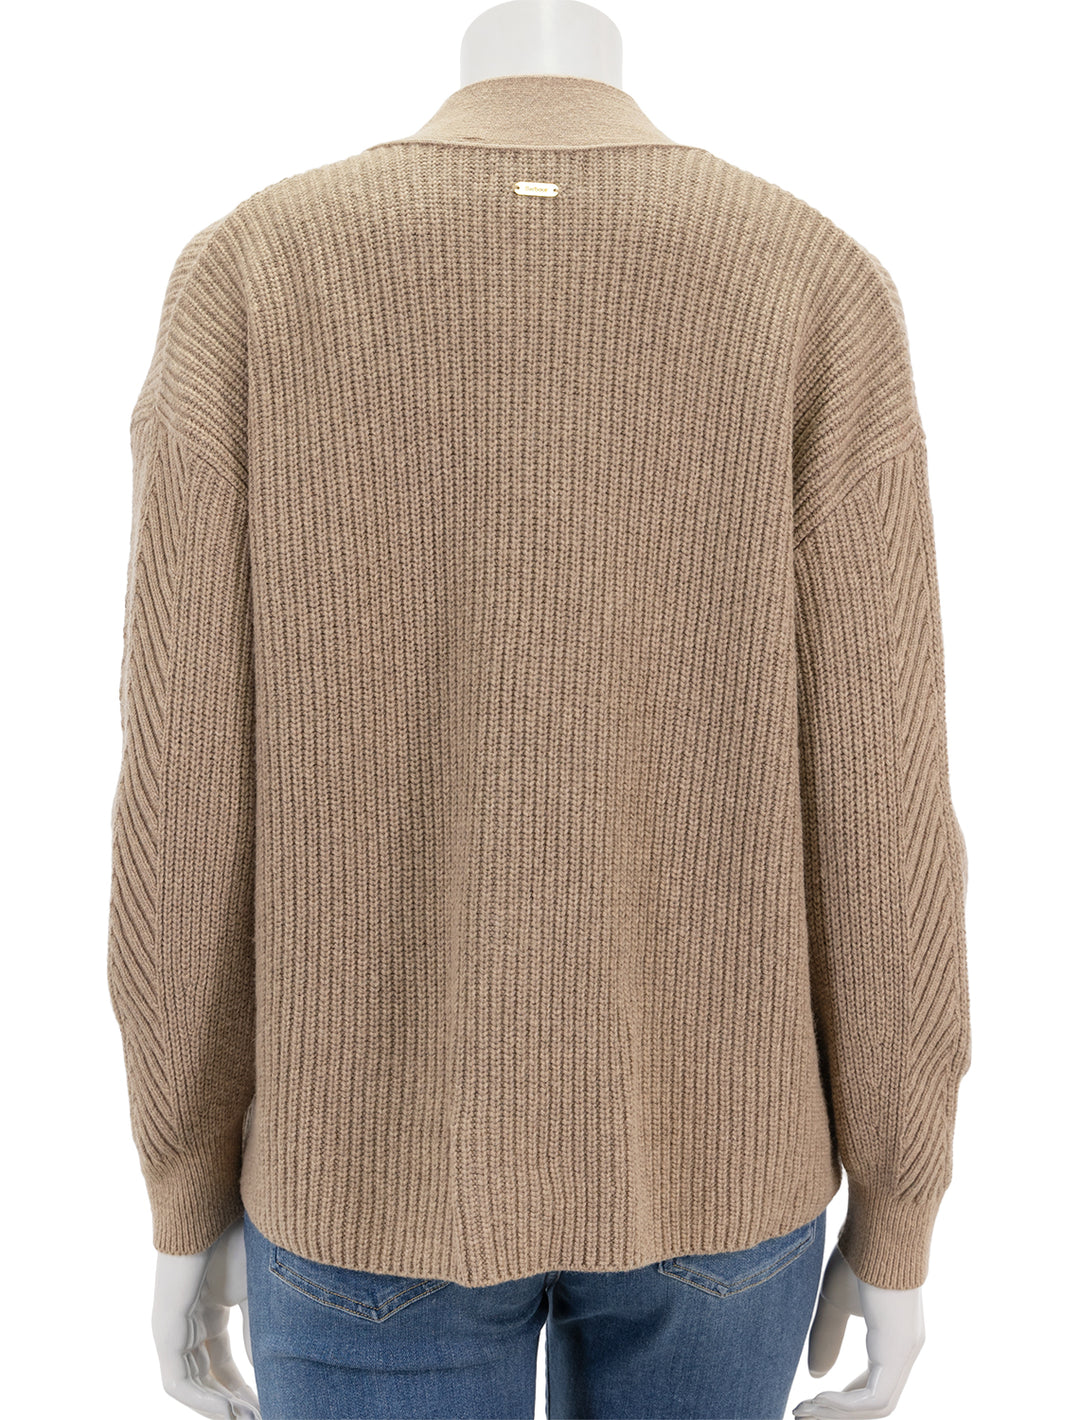 Back view of Barbour's catherine cardi in sepia.